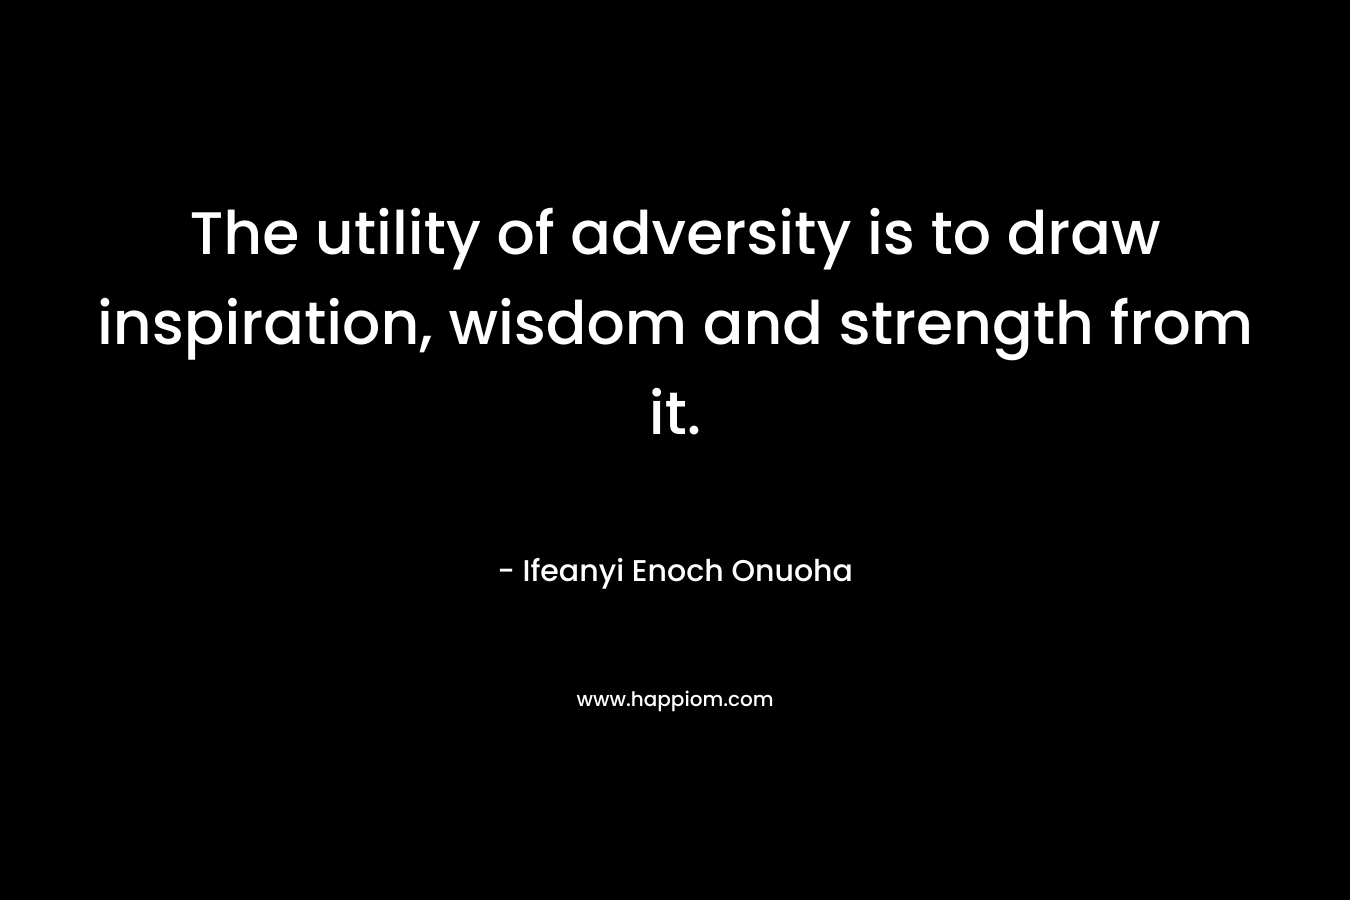 The utility of adversity is to draw inspiration, wisdom and strength from it.